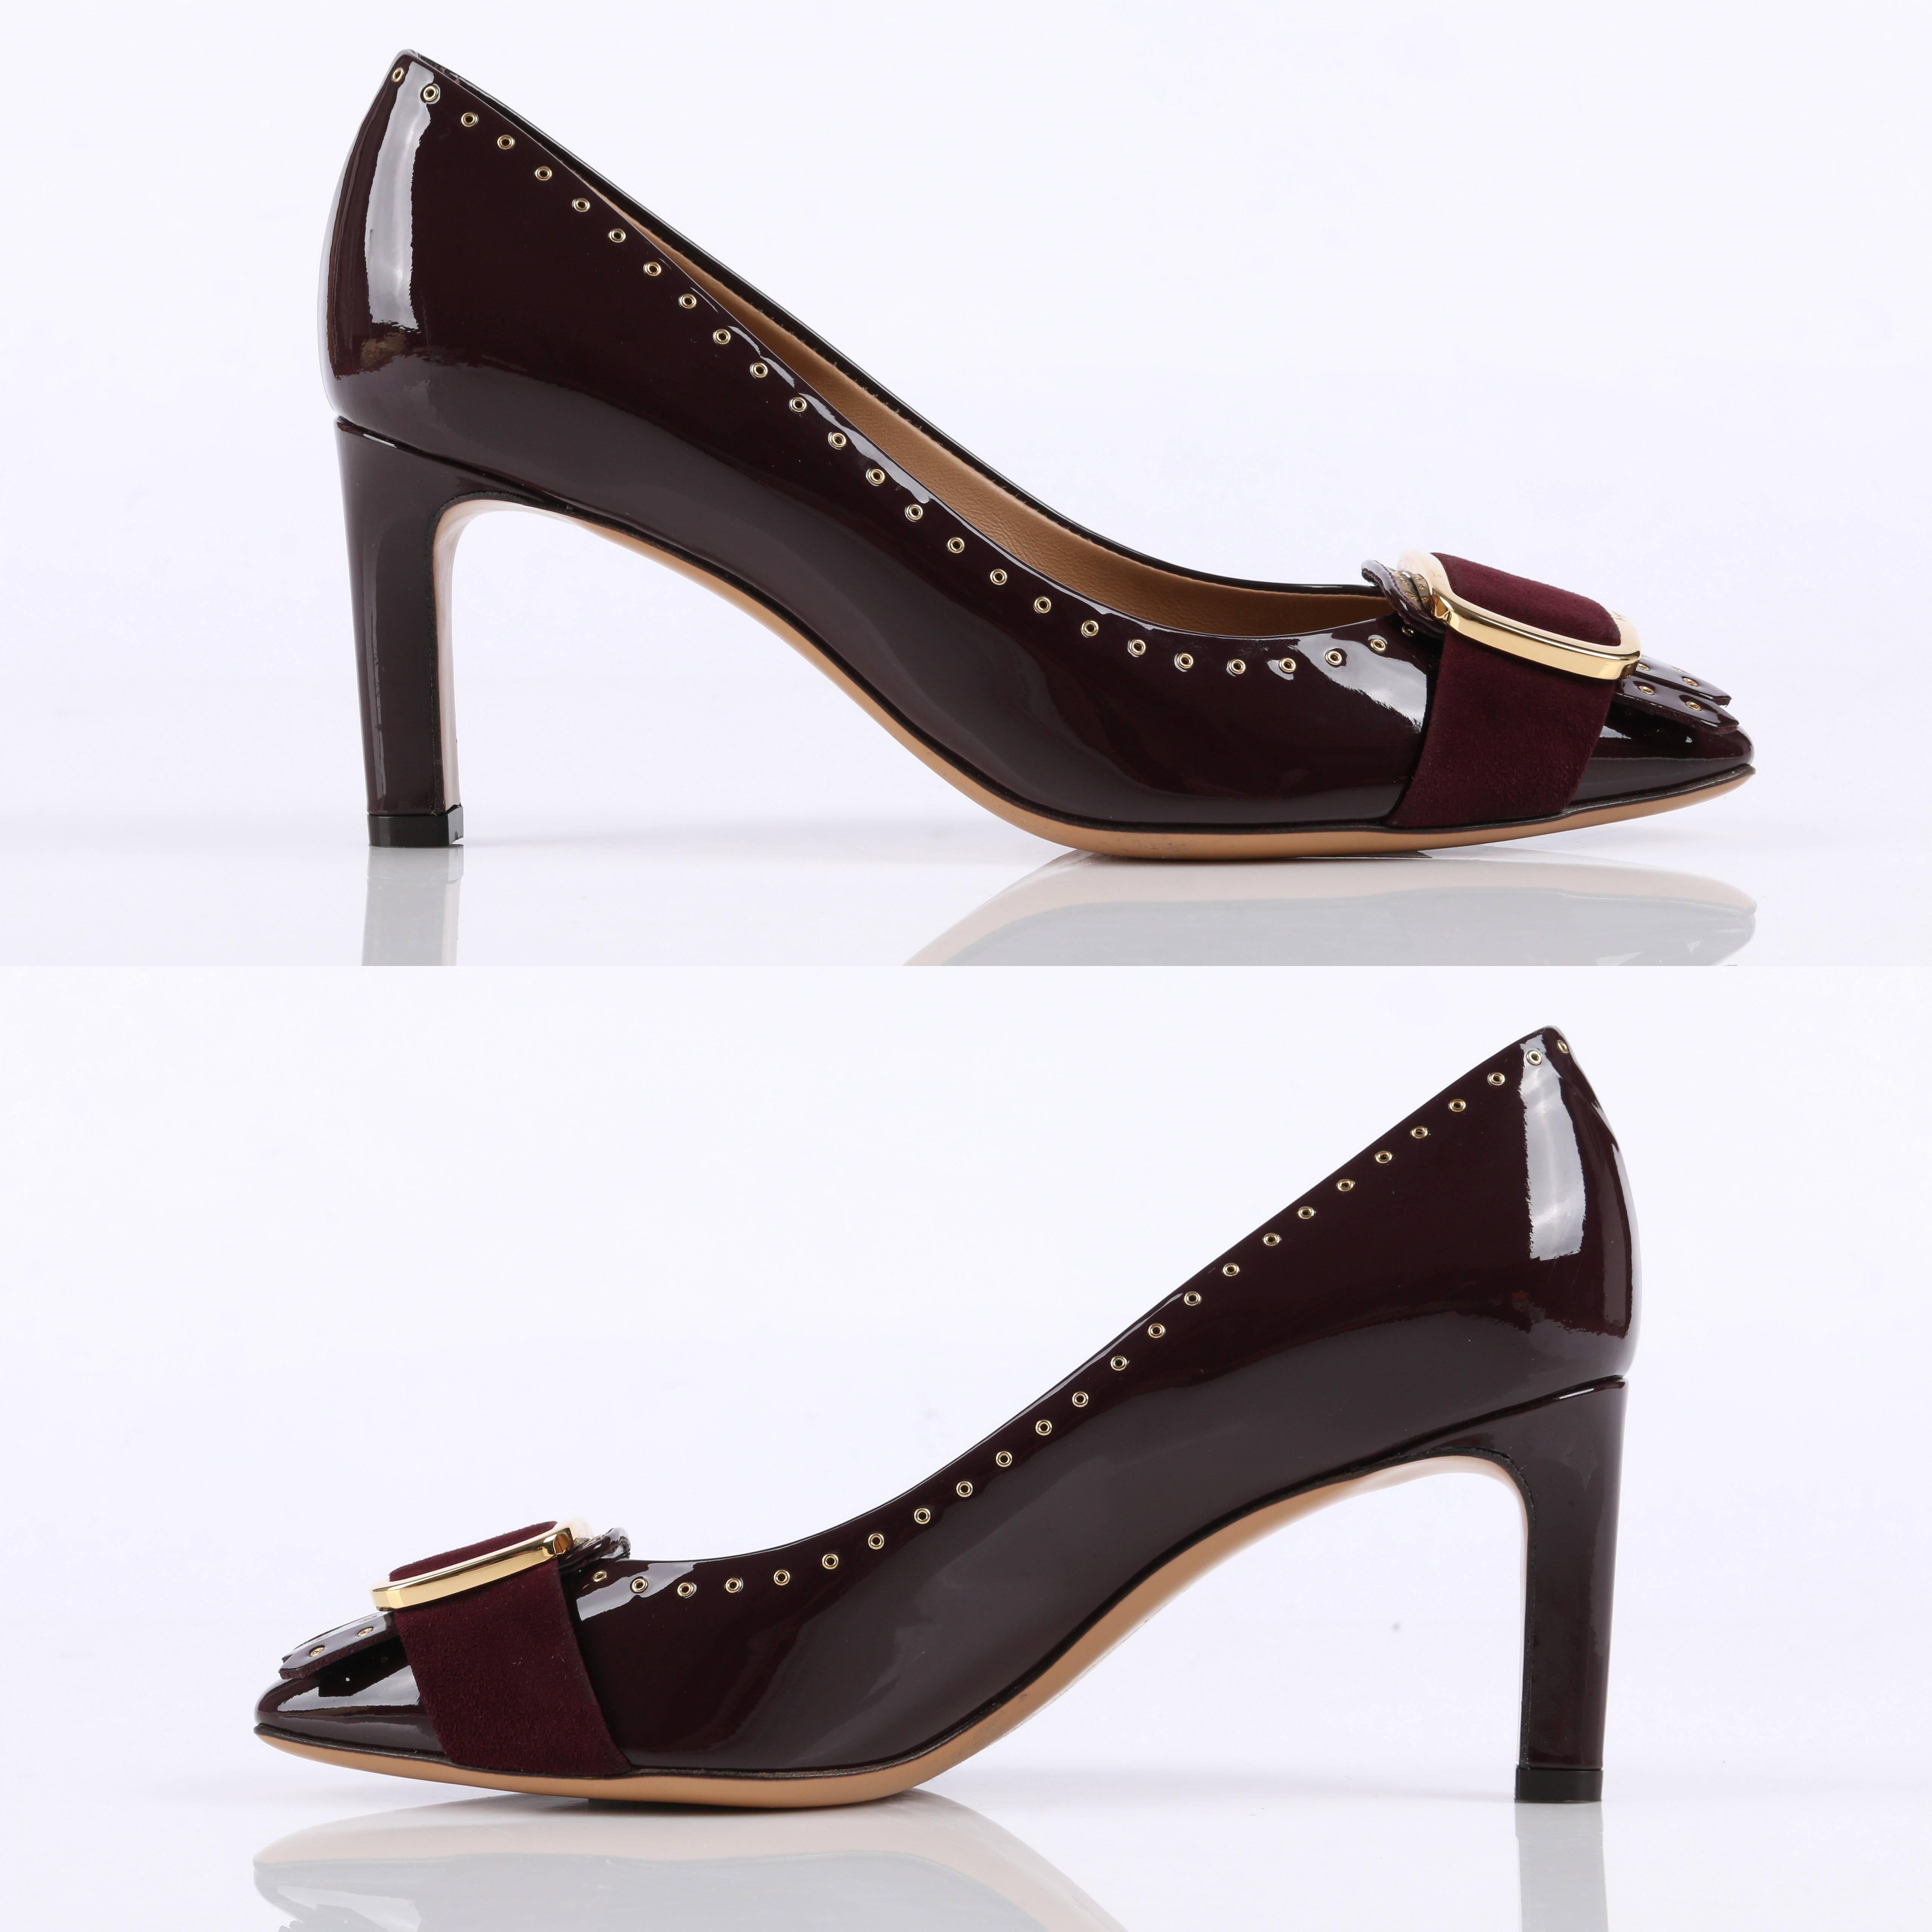 Salvatore Ferragamo burgundy patent leather pumps. Large gold buckle and suede strap with fringe detail on toe. Small gold grommets embellishment around edges and fringe. Slip on. Fully lined in leather. Top, lining, and sole all constructed of